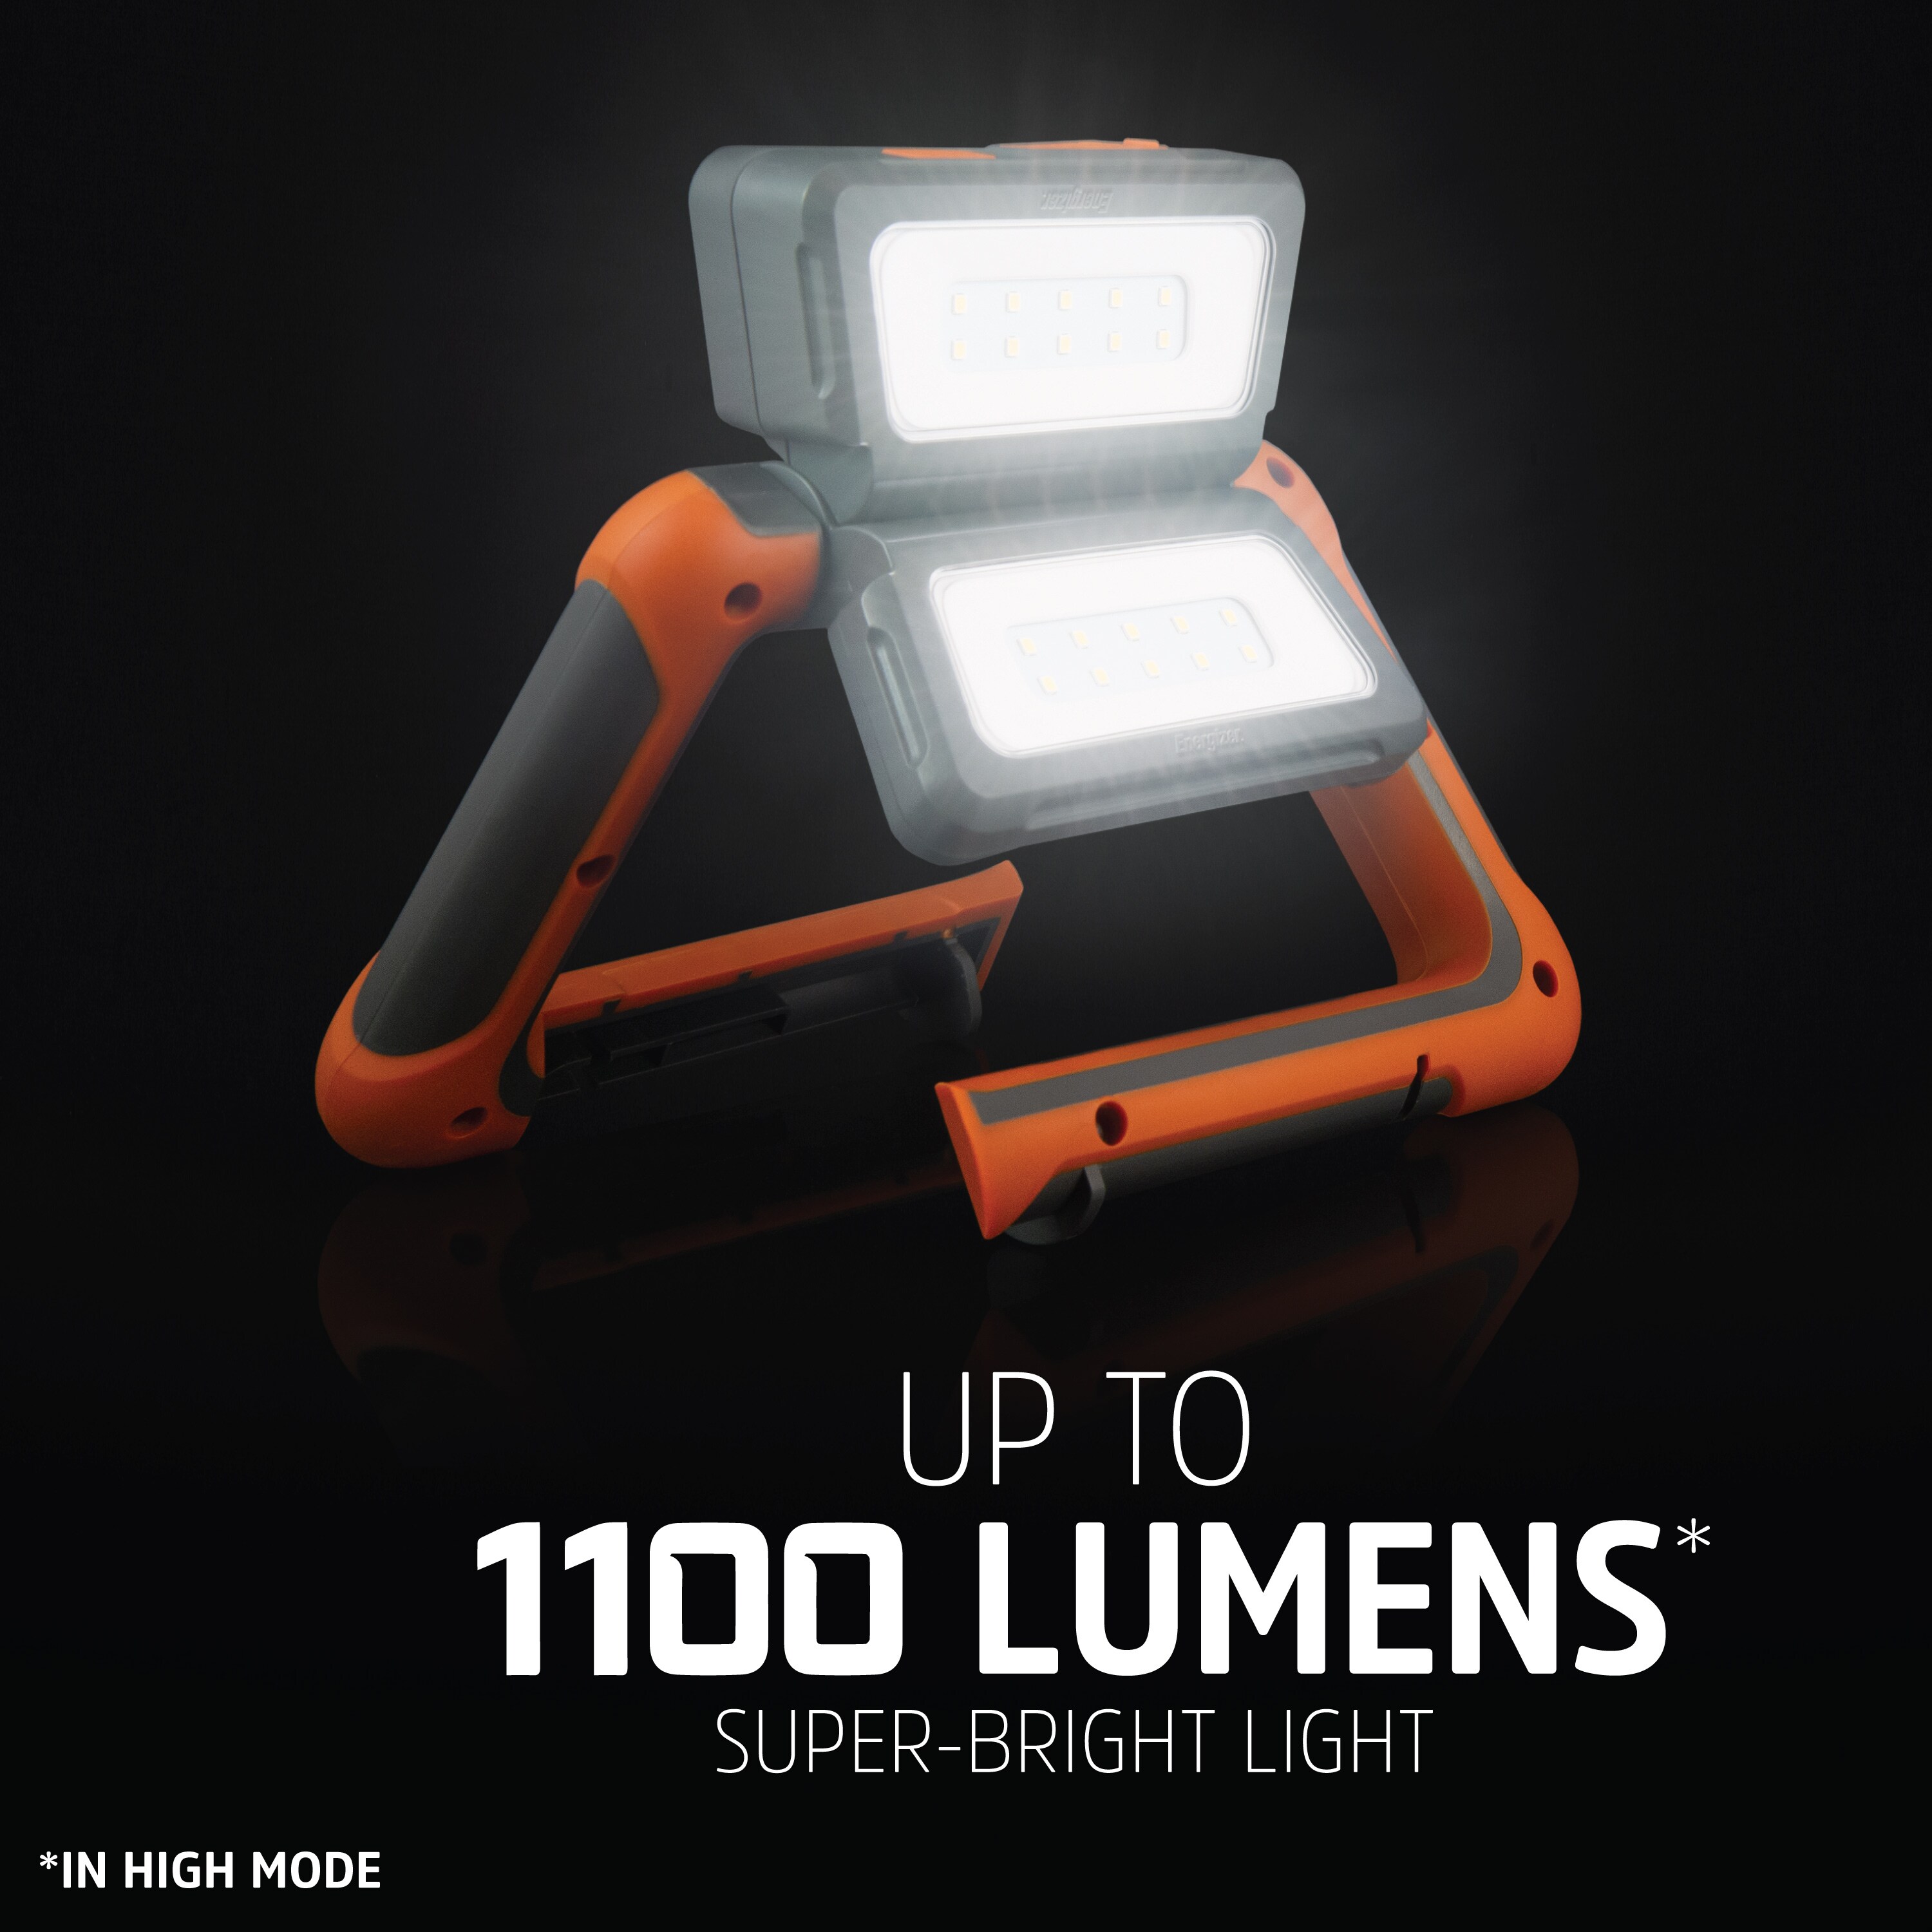 department (Battery in Camping Energizer 1100-Lumen Rechargeable Lantern Included) Camping Recharge LED the Lanterns at